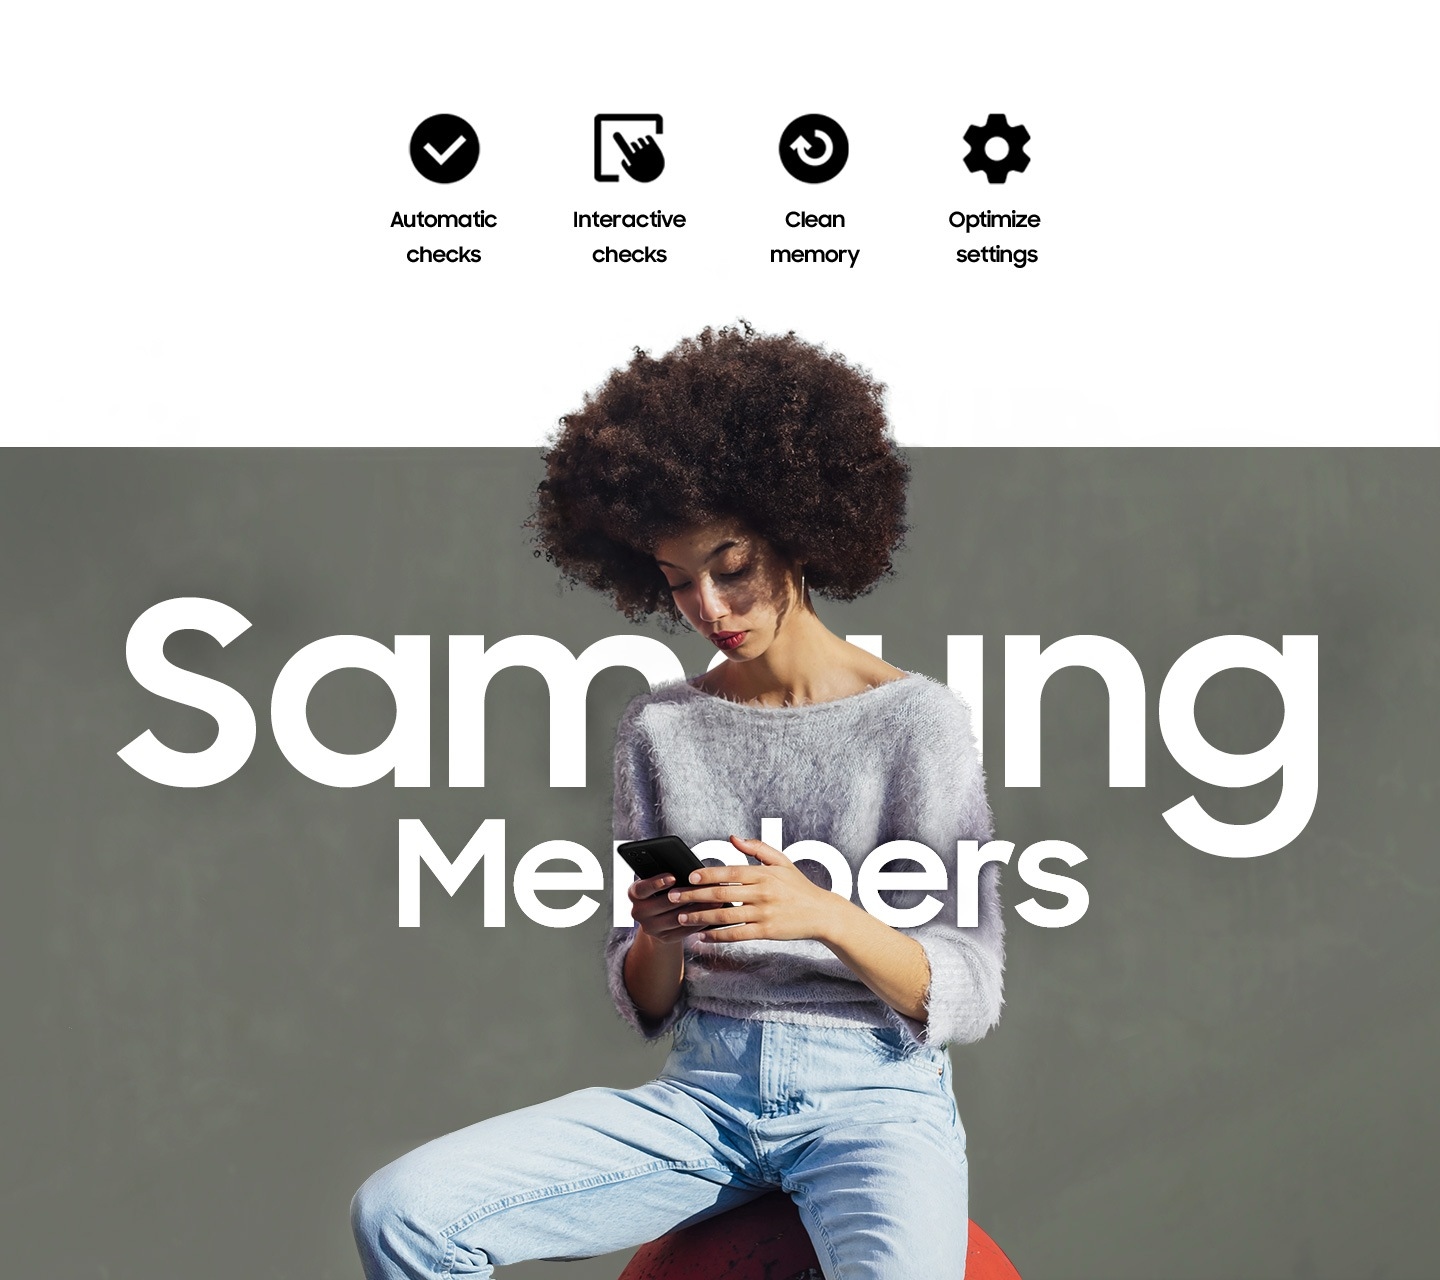 Samsung Members app diagnoses optimises your Samsung A04s for an optimum performance. A woman sitting and using her phone. Text saying Samsung Members is written across her. Above her are four icons on Automatic checks, Interactive checks, Clean memory and Optimize settings from left to right.